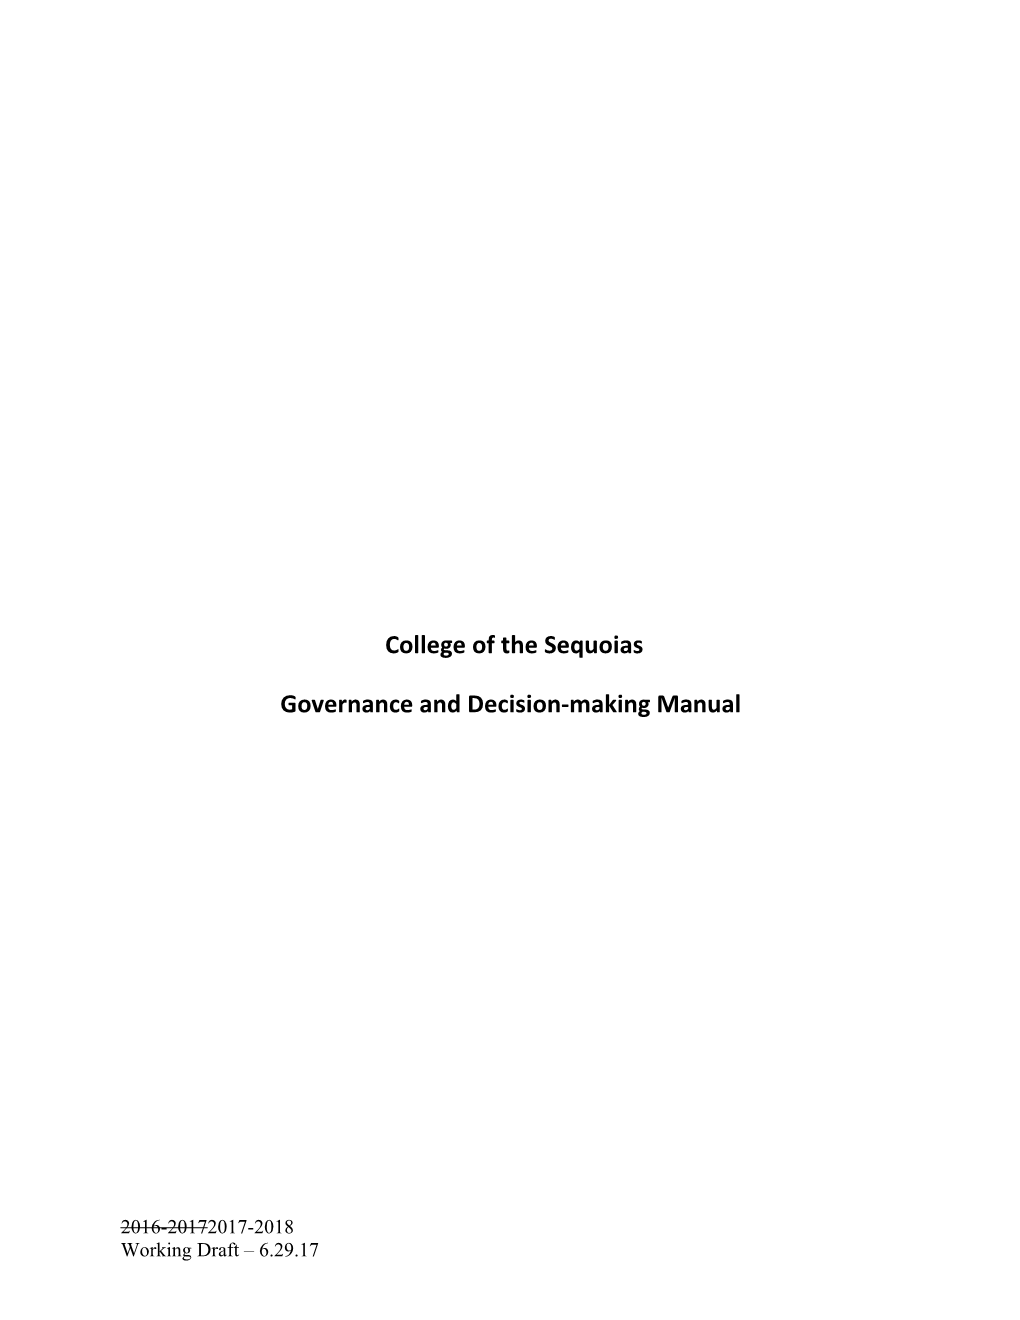 College of the Sequoias Communitycollegedistrict